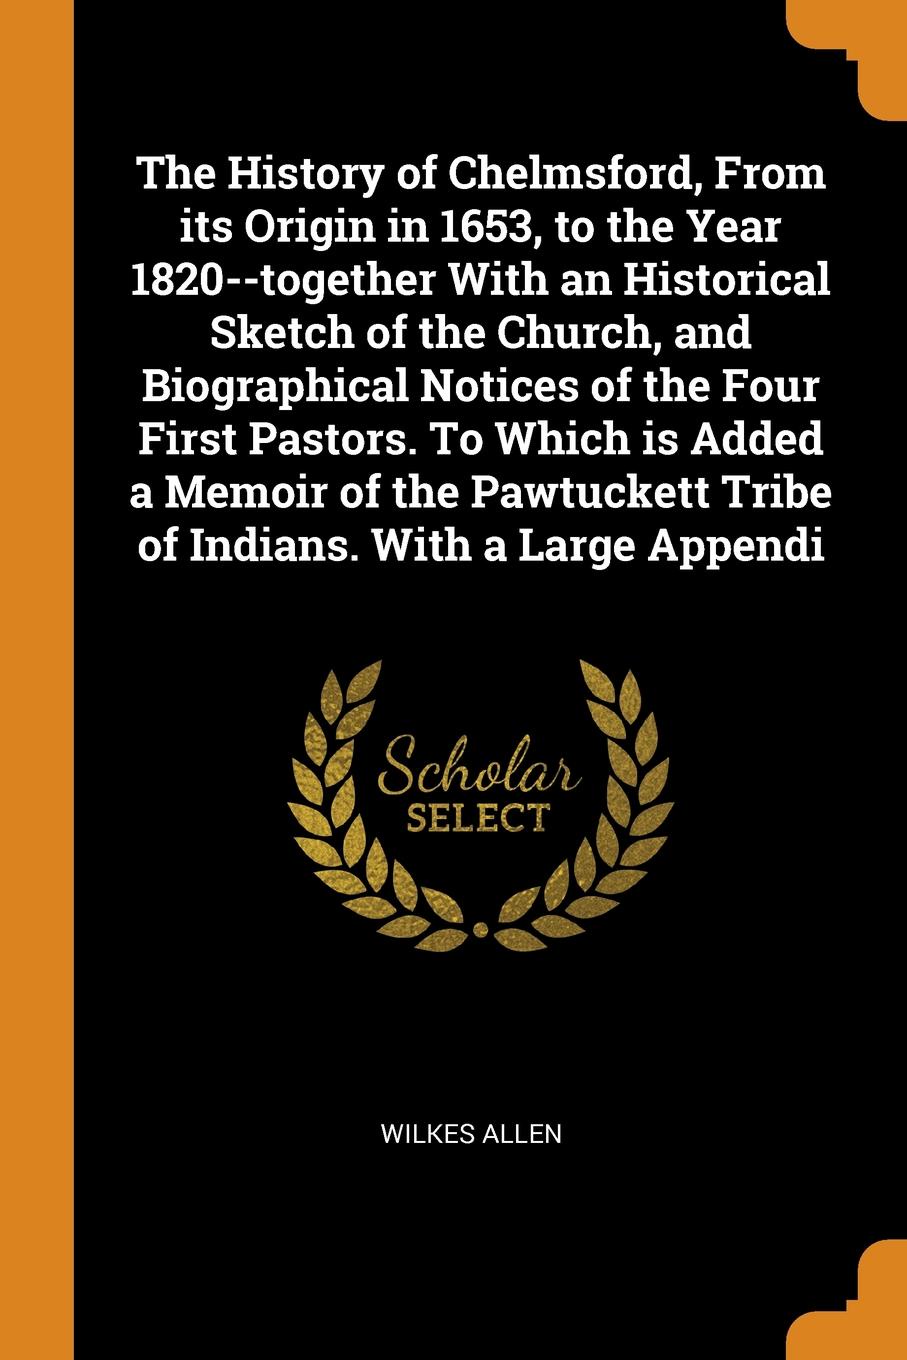 The History of Chelmsford, From its Origin in 1653, to the Year 1820--together With an Historical Sketch of the Church, and Biographical Notices of the Four First Pastors. To Which is Added a Memoir of the Pawtuckett Tribe of Indians. With a Large...